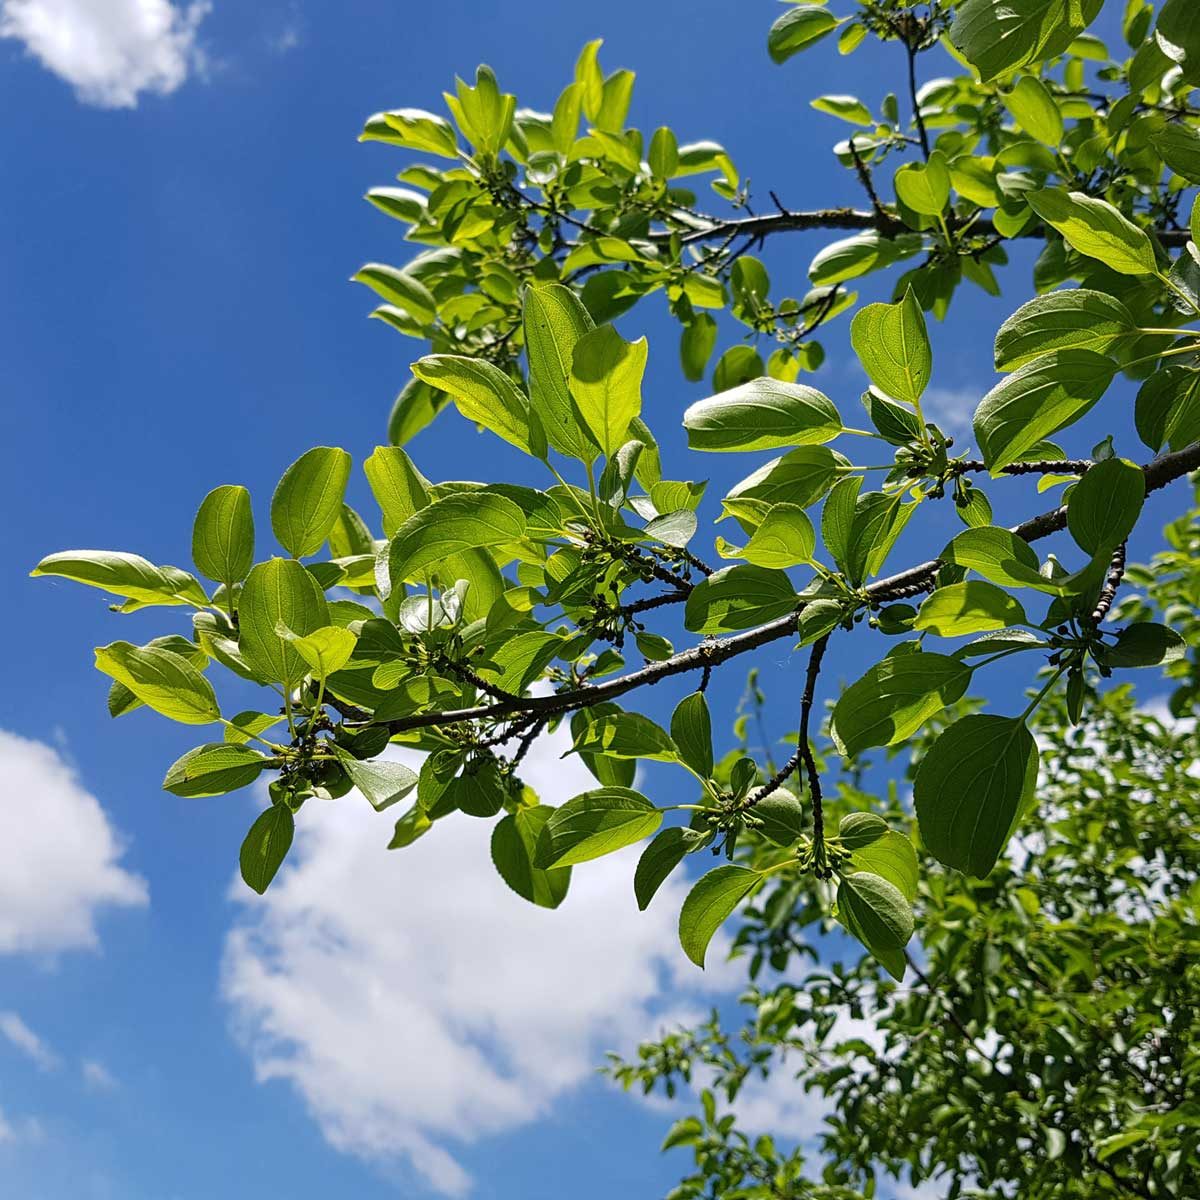 How to Get Rid of Buckthorn